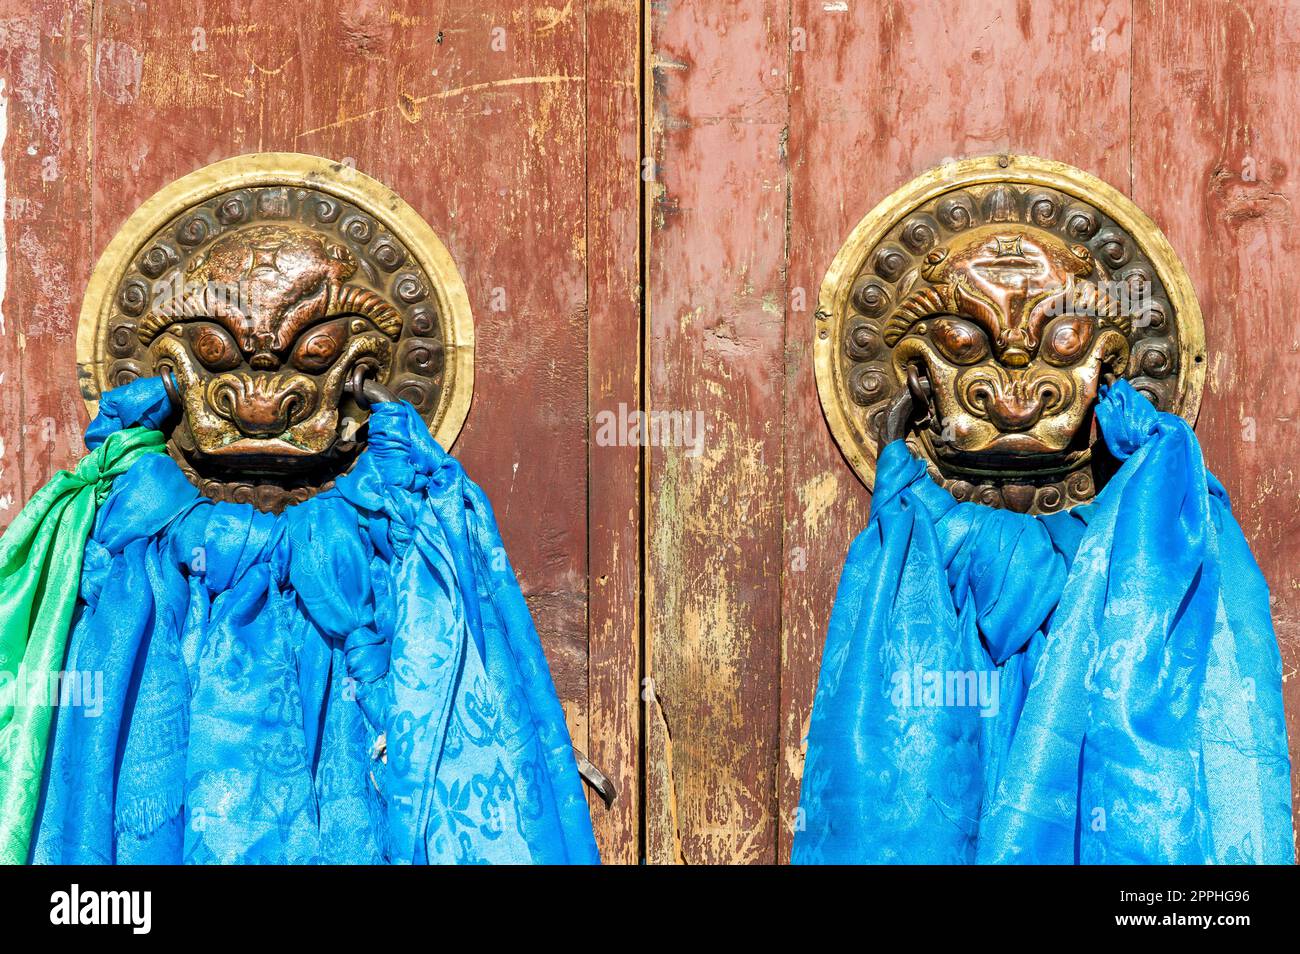 Two decorated door knockers draped with prayer cloths at a gate to a Buddhist monastery in Karakorum, the former capital of Mongolia, Central Asia Stock Photo